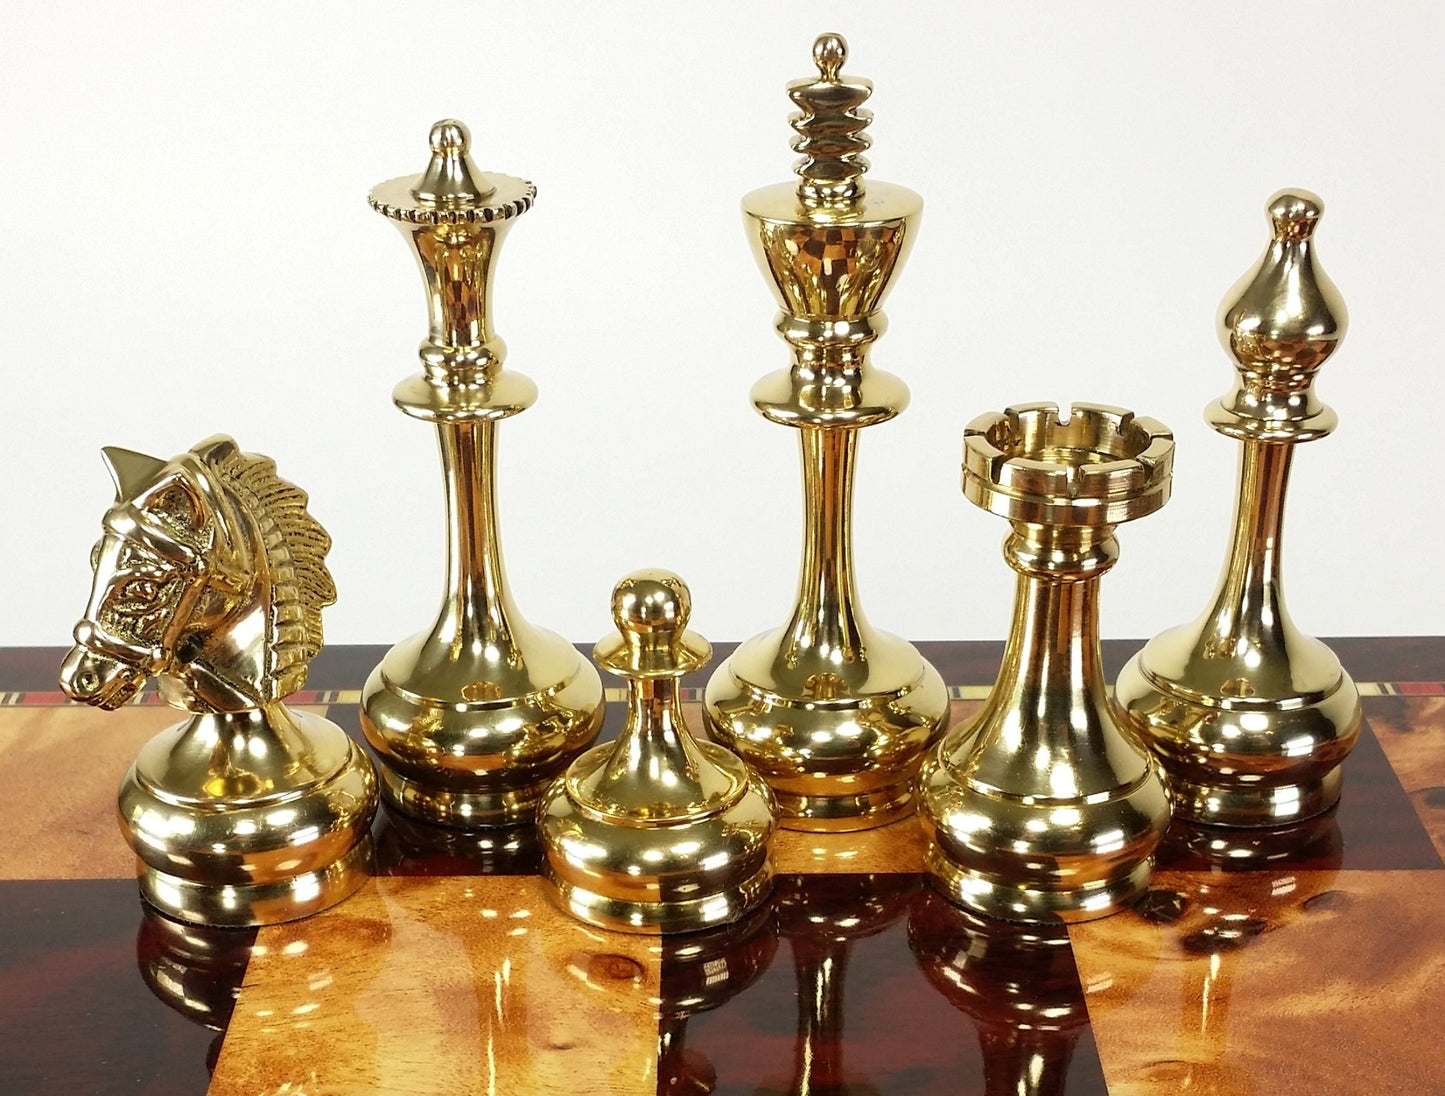 Real Brass Metal Black Gold Staunton Bridled Knight Chess Set Cherry Color Board